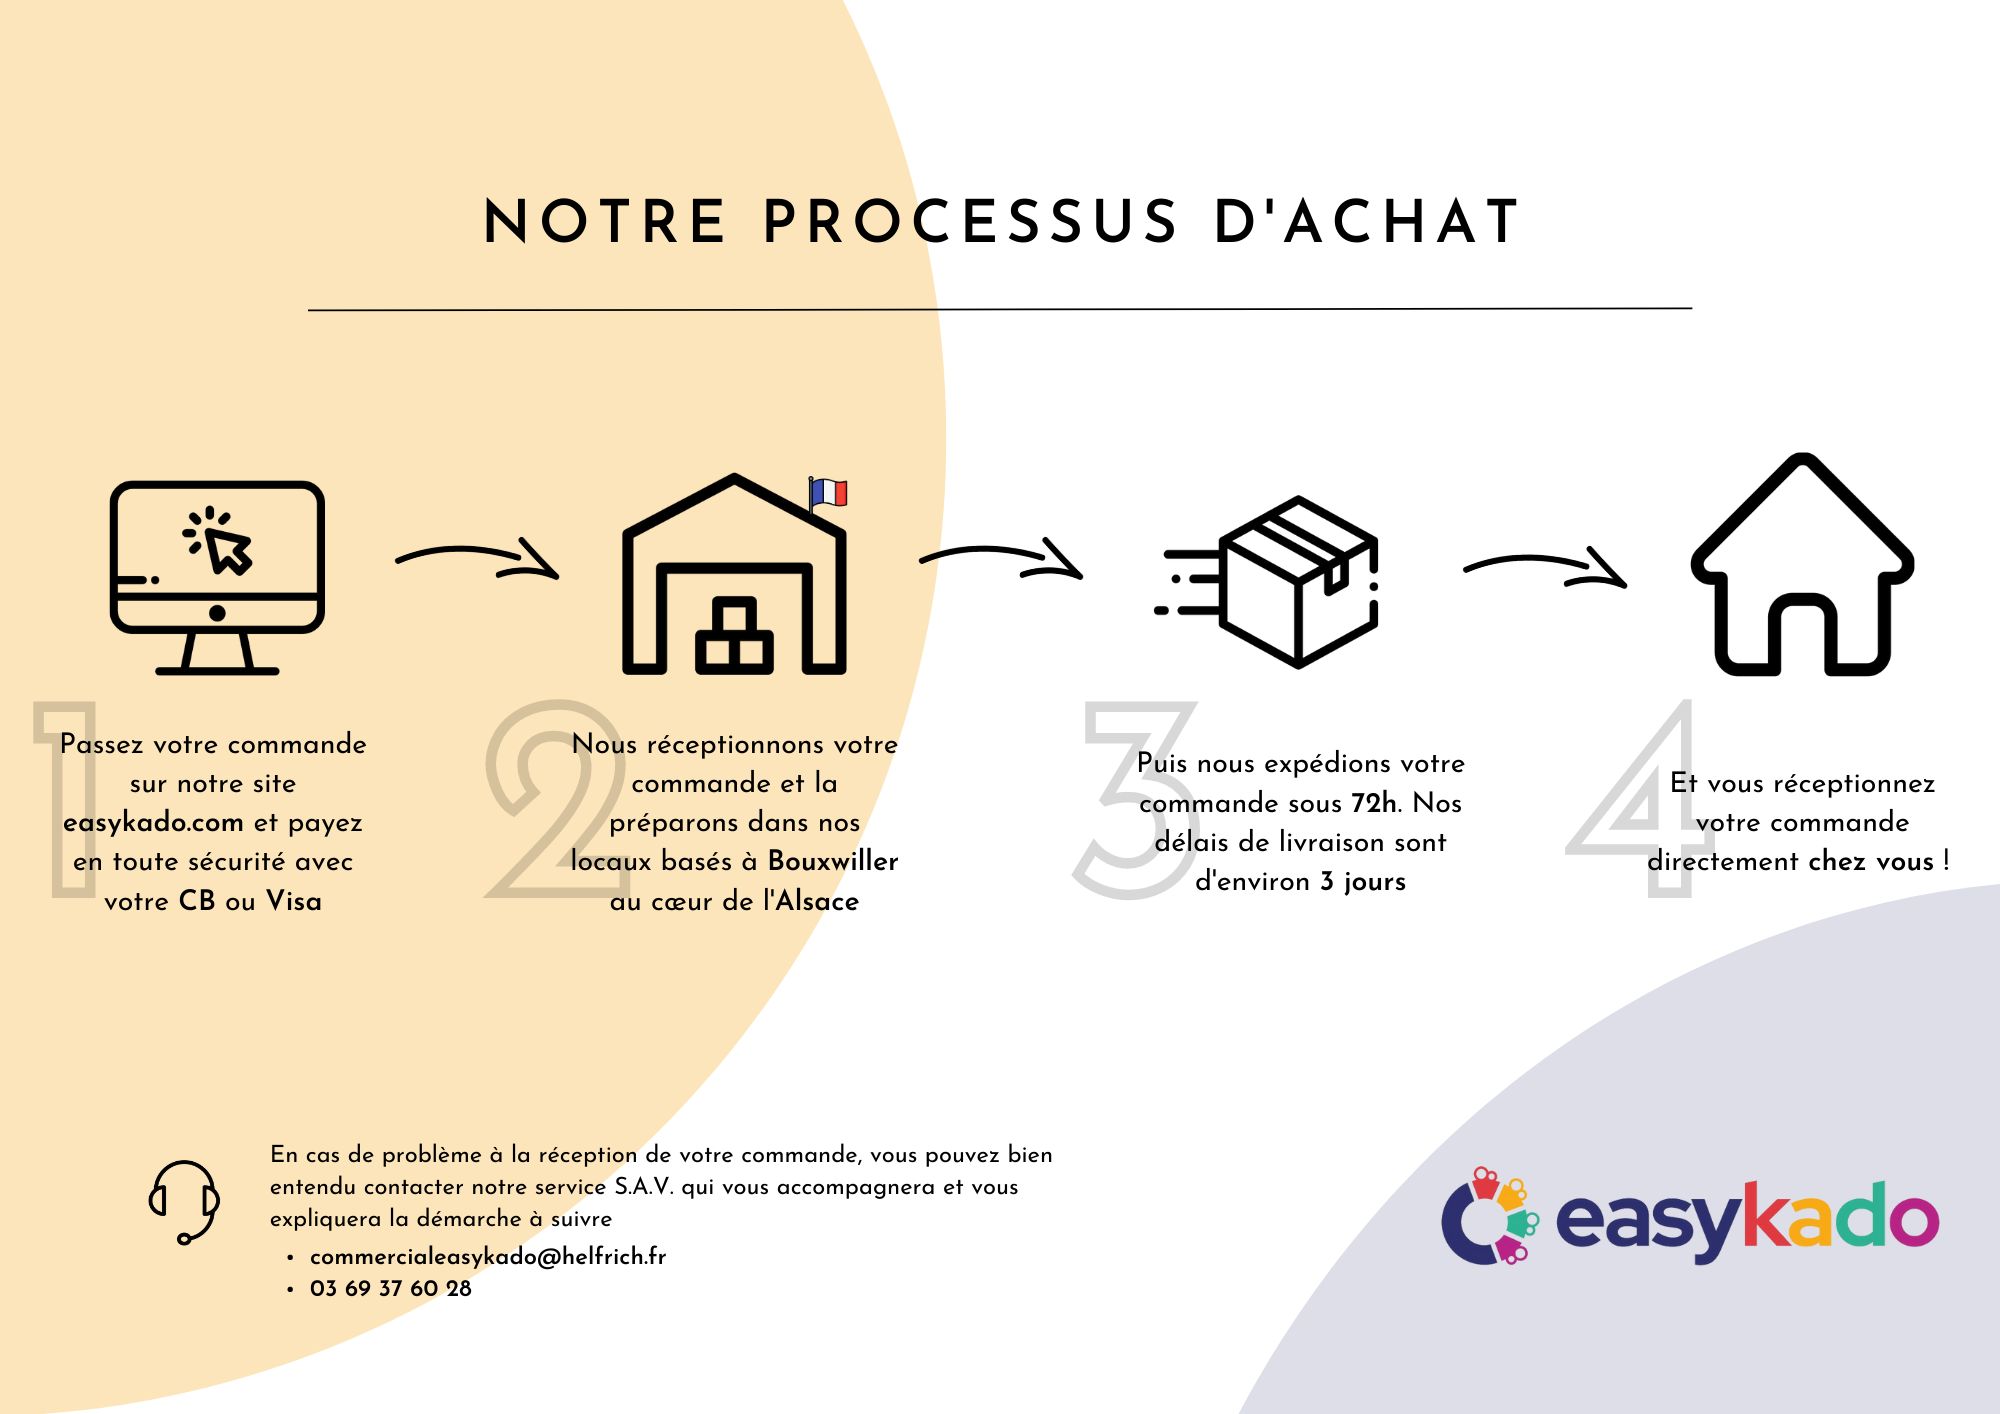 Notre processus dachat.png